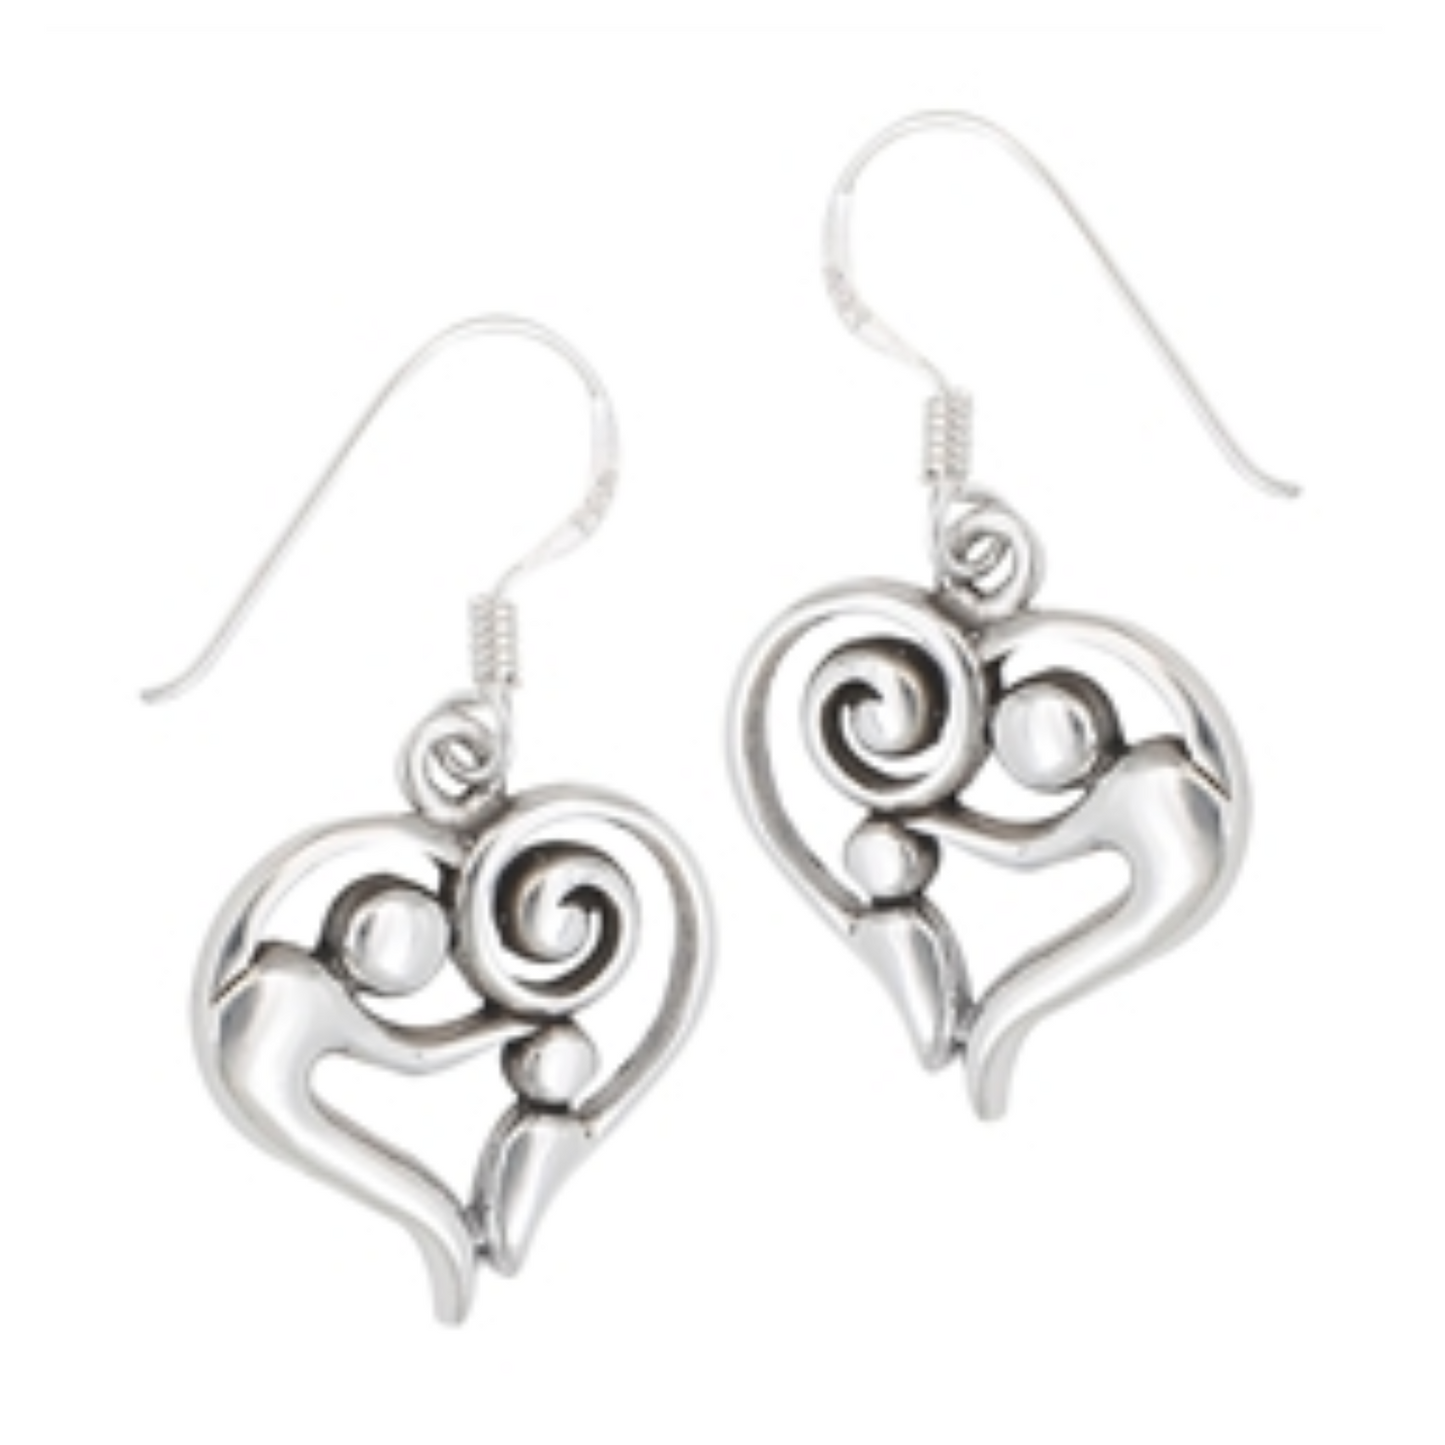 Sterling Silver Parent and Child Heart Earrings